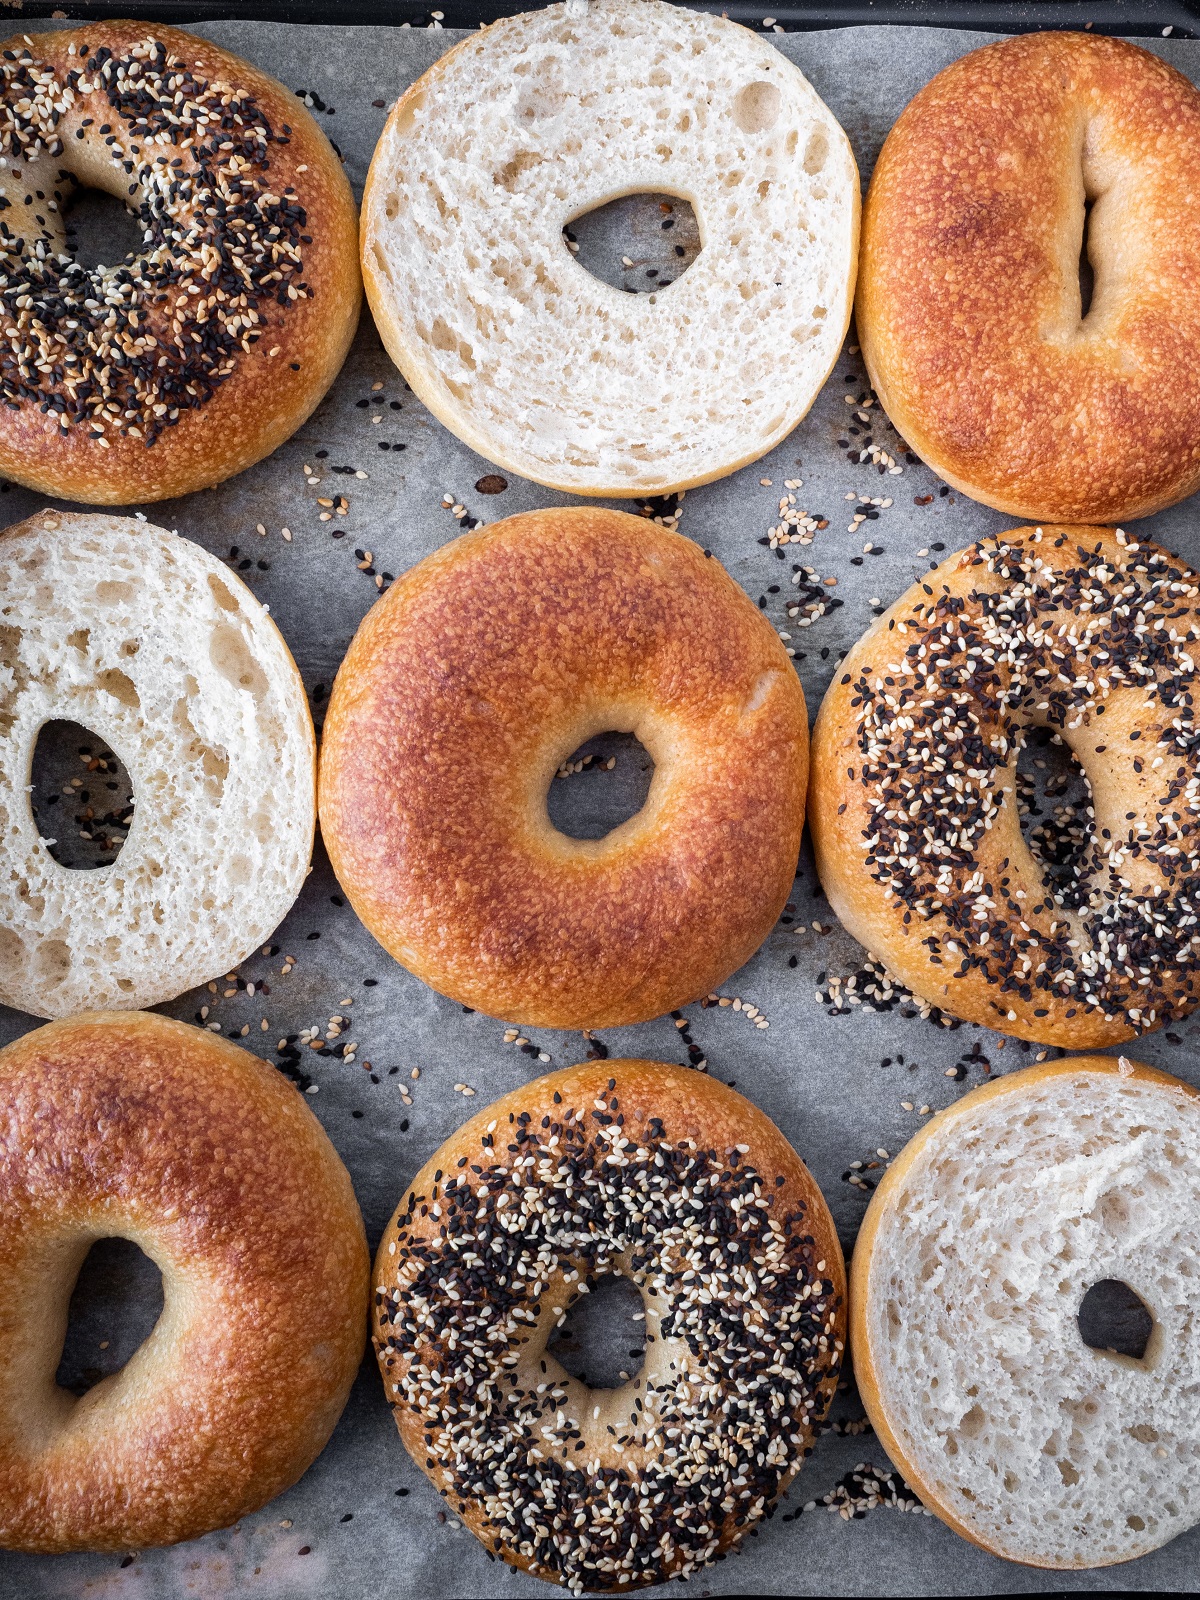 From savory garlic to Sweet chocolate, New York City produces some of the best bagels in the world.